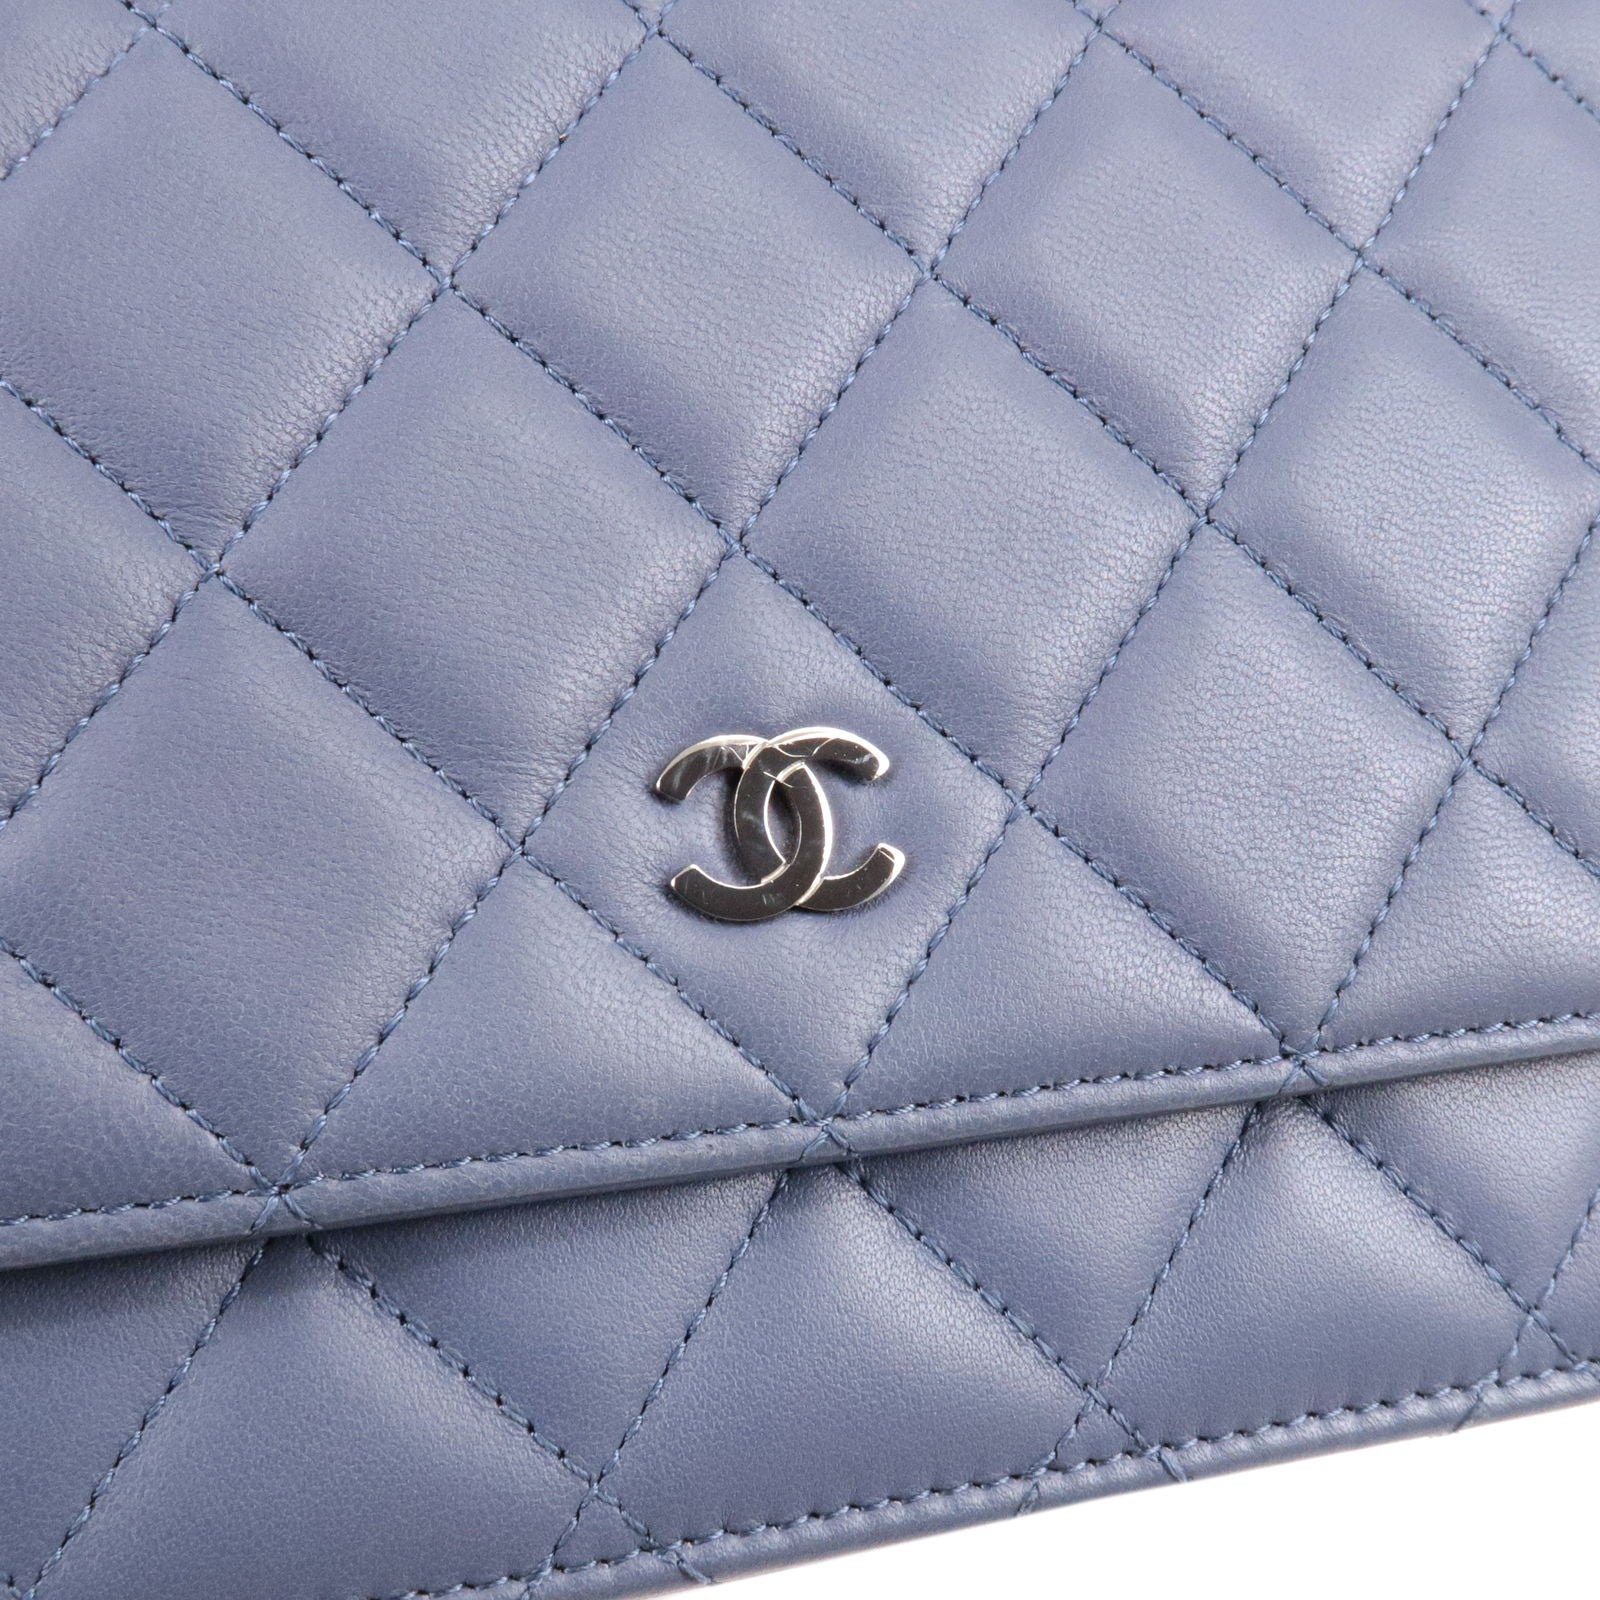 Chanel Vintage Light Blue Quilted Patent Leather Heart Shaped Vanity Handbag  Limited Edition